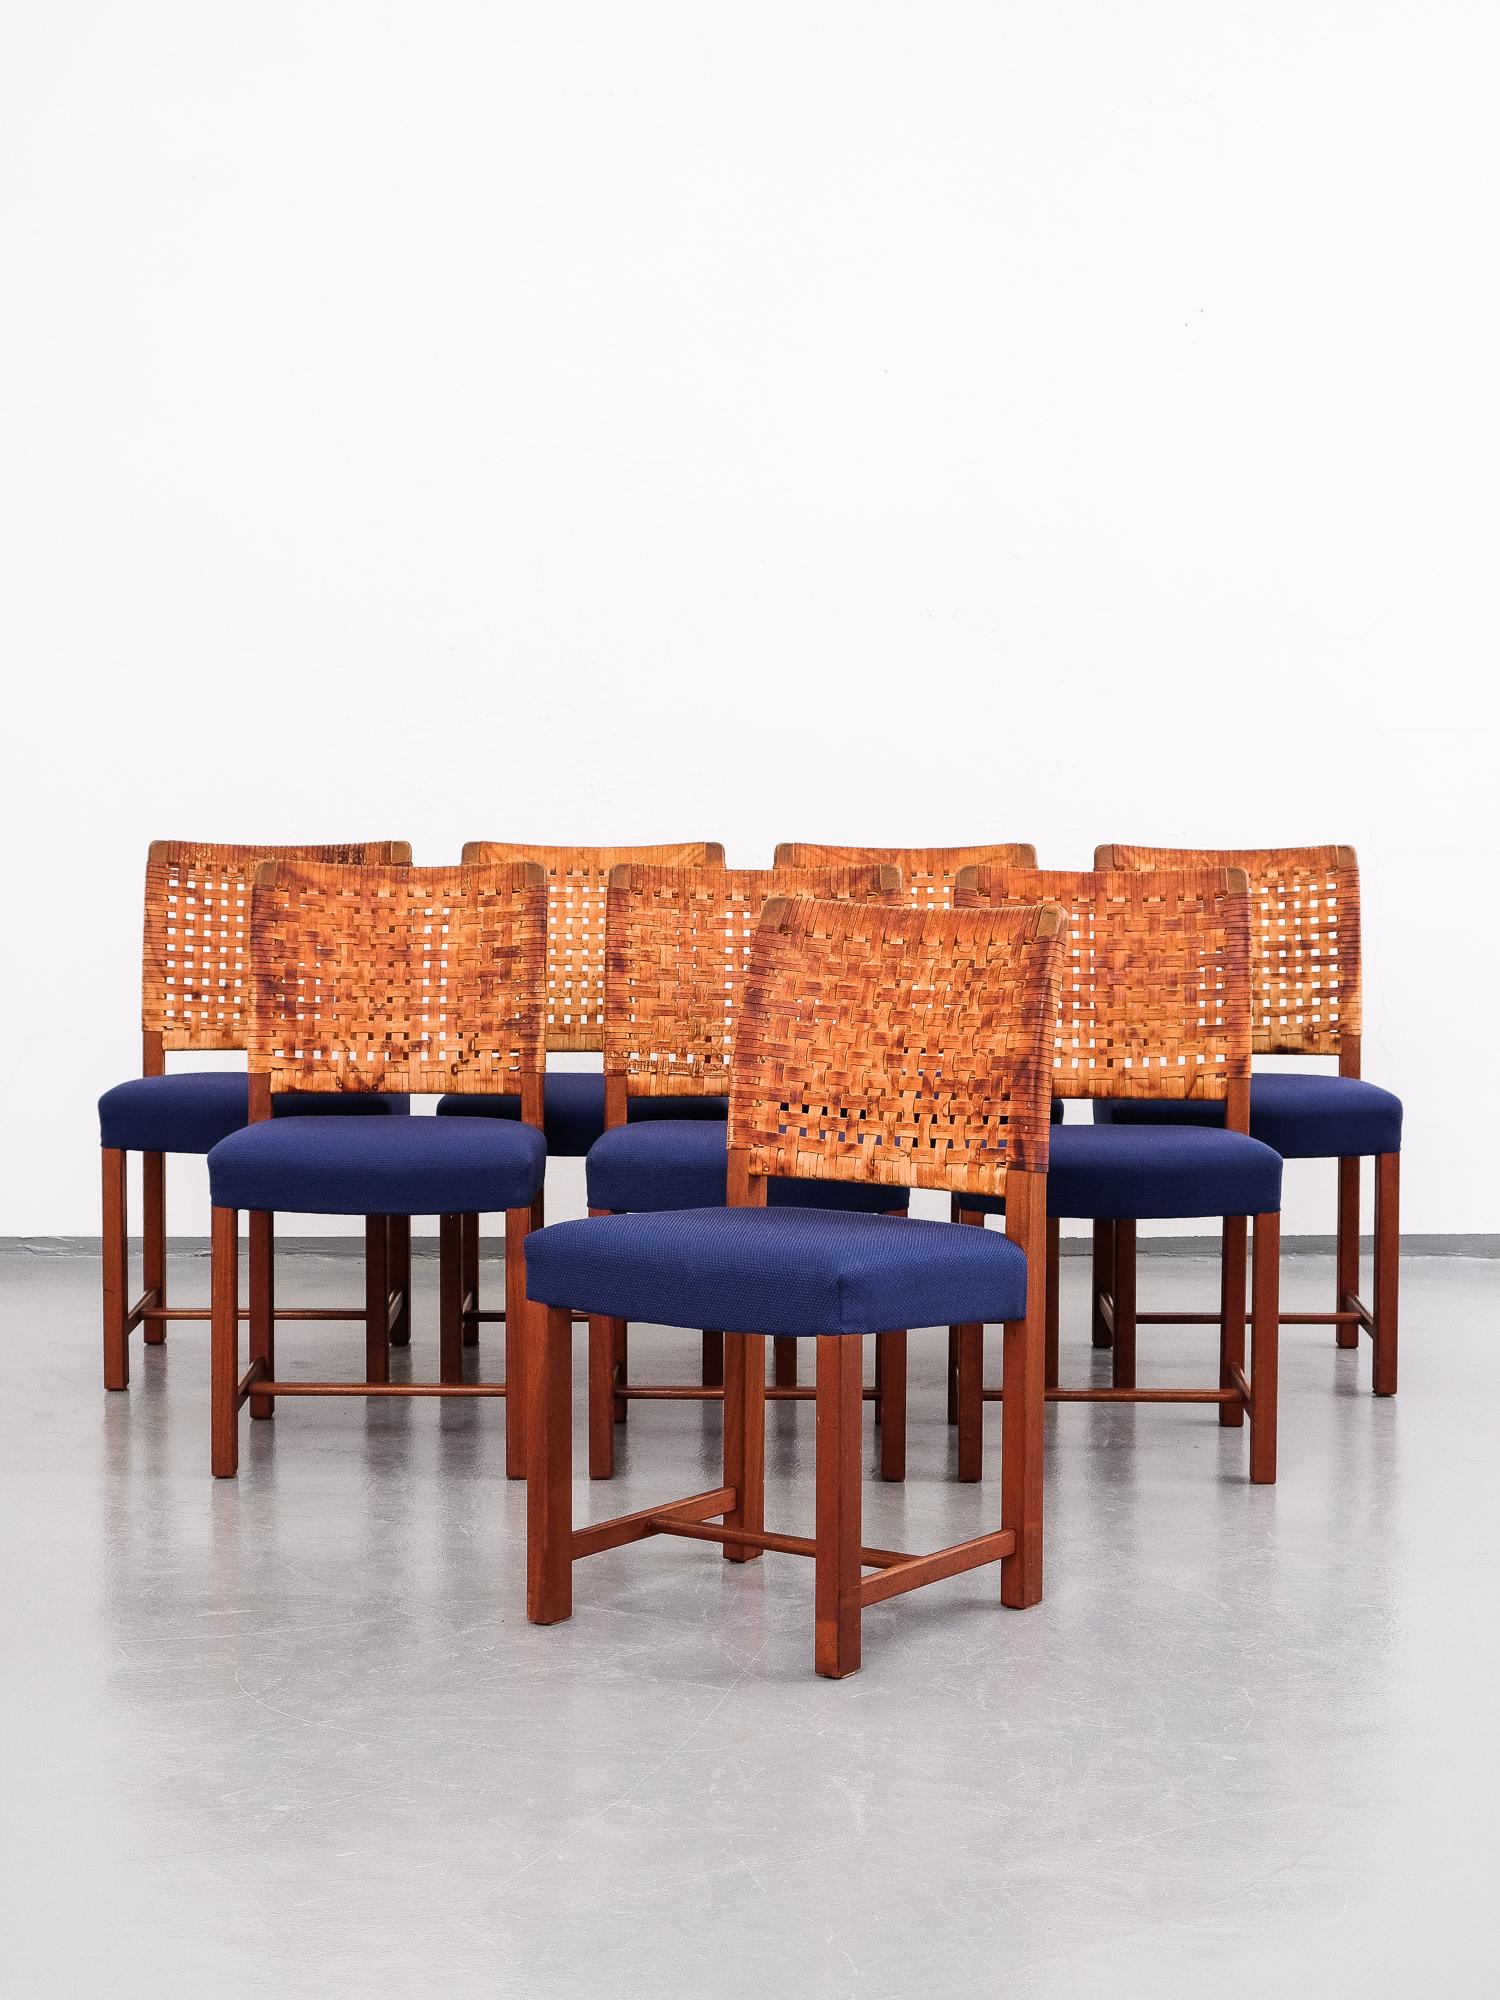 Set of eight dining chairs designed by Carl Gustaf Hiort af Ornäs for Mikko Nupponen in the 1950. Frame and legs of solid mahogany, original patinated leather strap back and blue fabric upholstery on the seats.